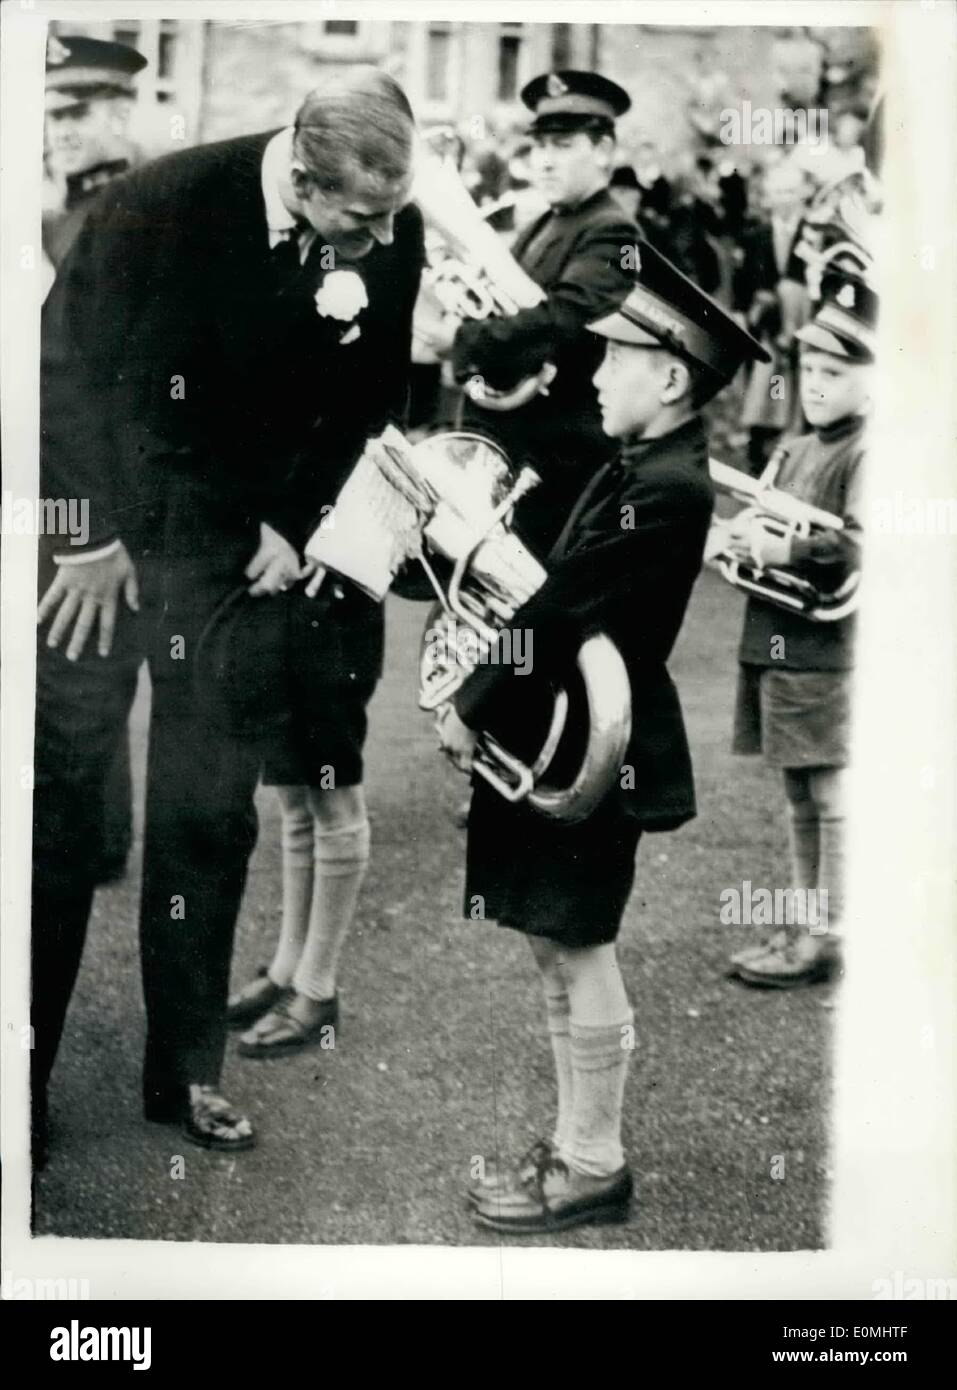 Aug. 08, 1955 - The Duke Chats to a young Euphonium Player. Royal visit to the isle of man: H.M. The Queen and the Duke of Edinburgh concluded their visit to the Isle of Man yesterday and started a cruise through the Western Isles to be followed by their holiday at Balmoral. The Duke is seen here as he stops to chat to 10 year old Charles Grigor a Salvation Army band boy - when the Royal party visited Peel, Isle of Man before leaving the island. Stock Photo